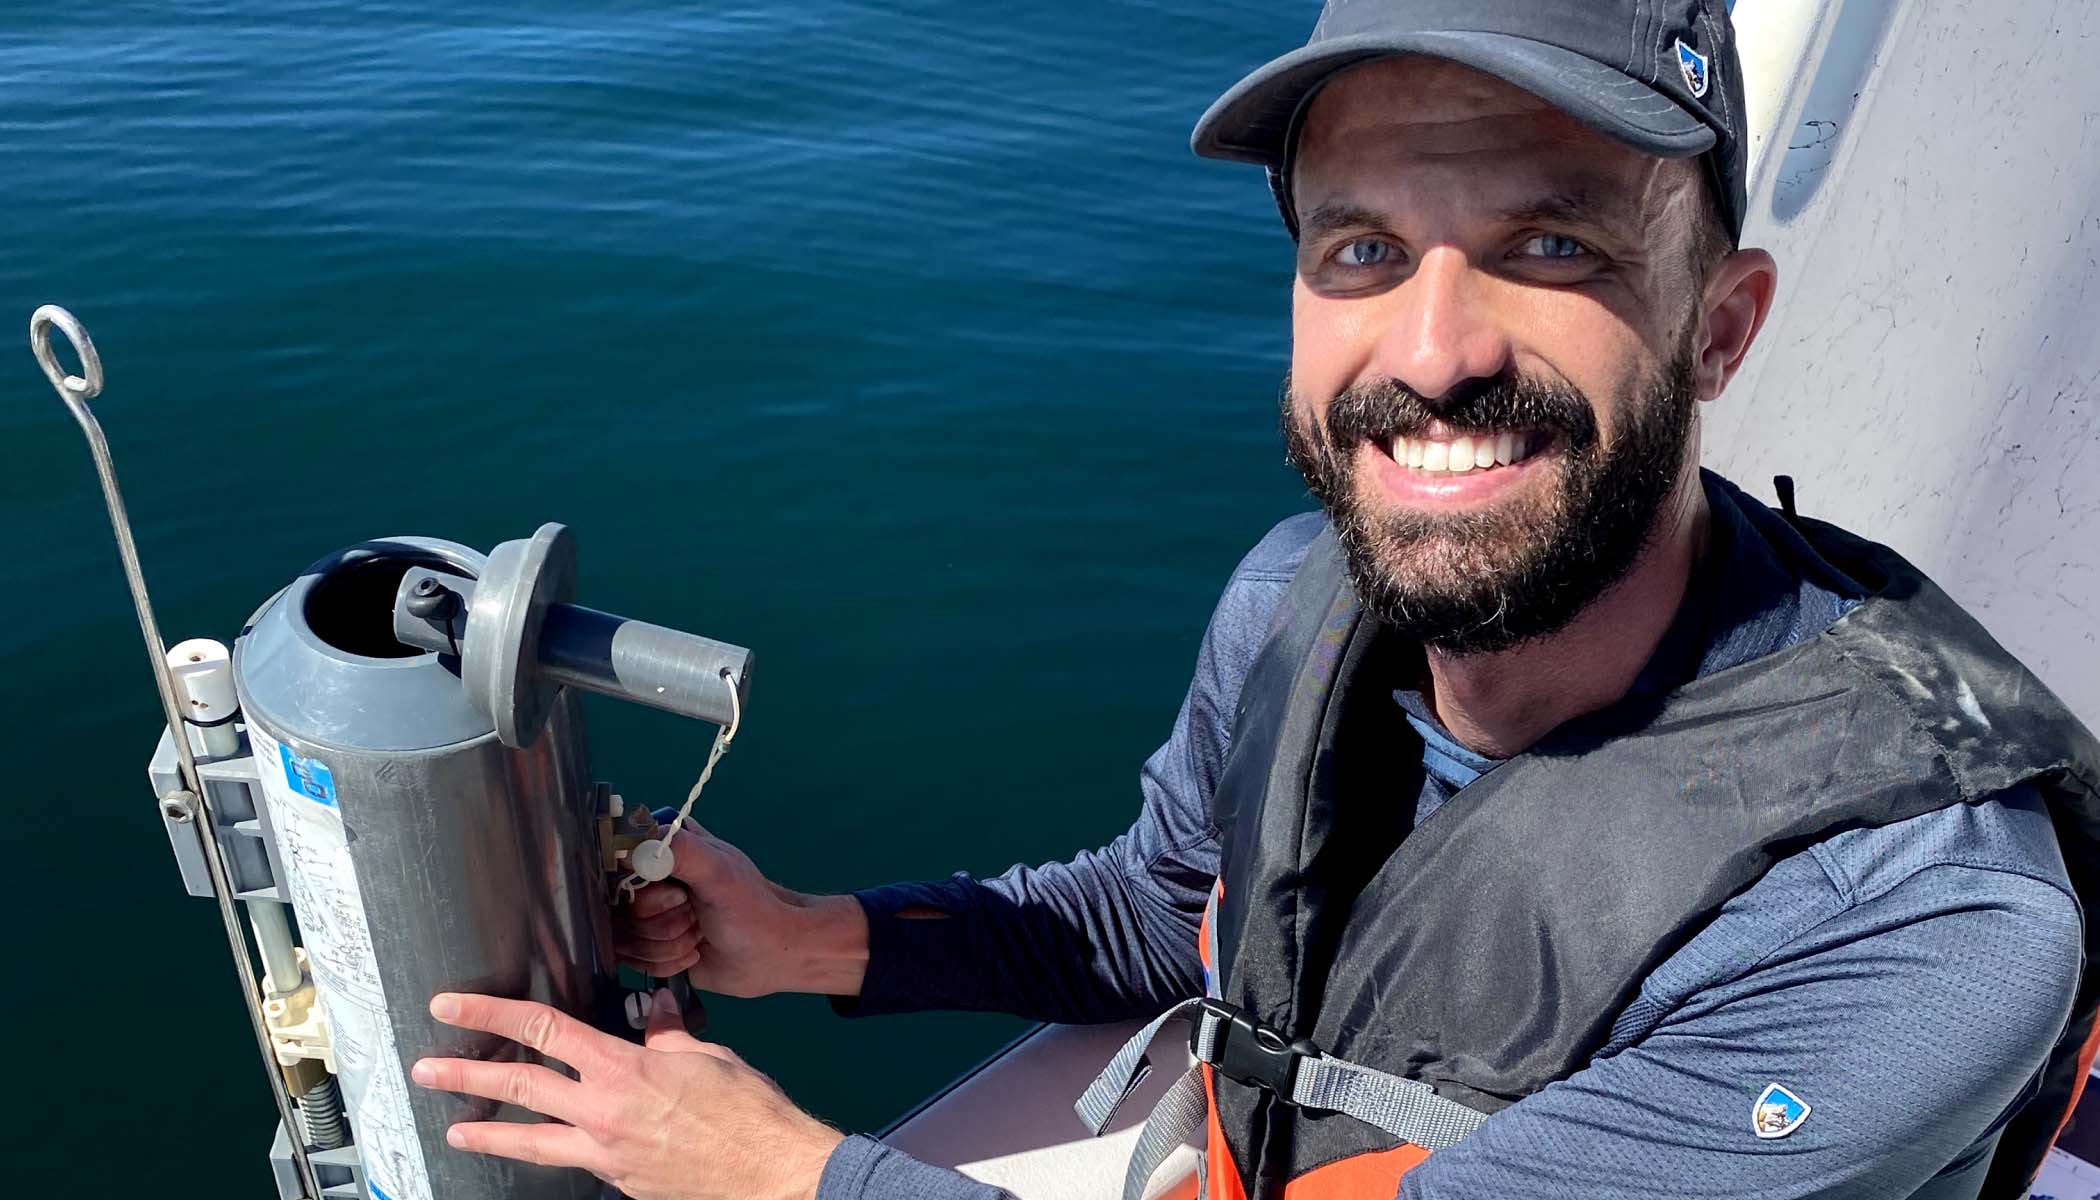 James Gately wearing hat and life vest sits in a boat, smiles as he collects seawater samples.